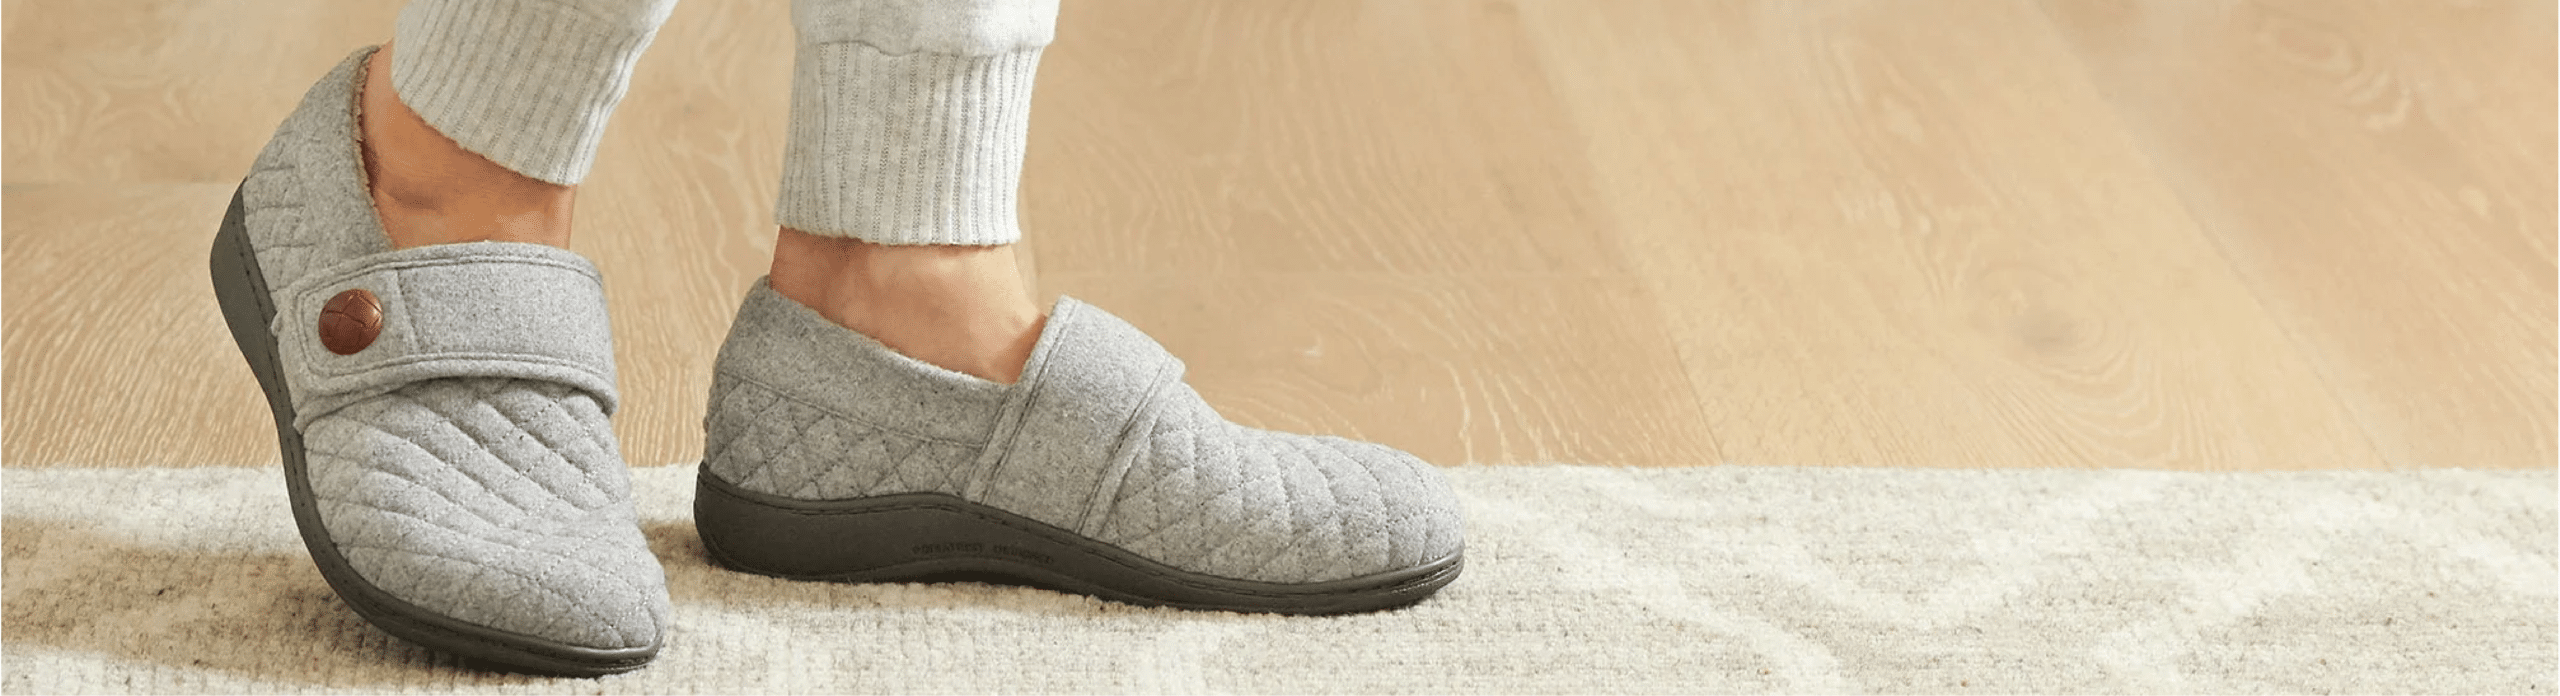 Slippers with Support - The Bone Store